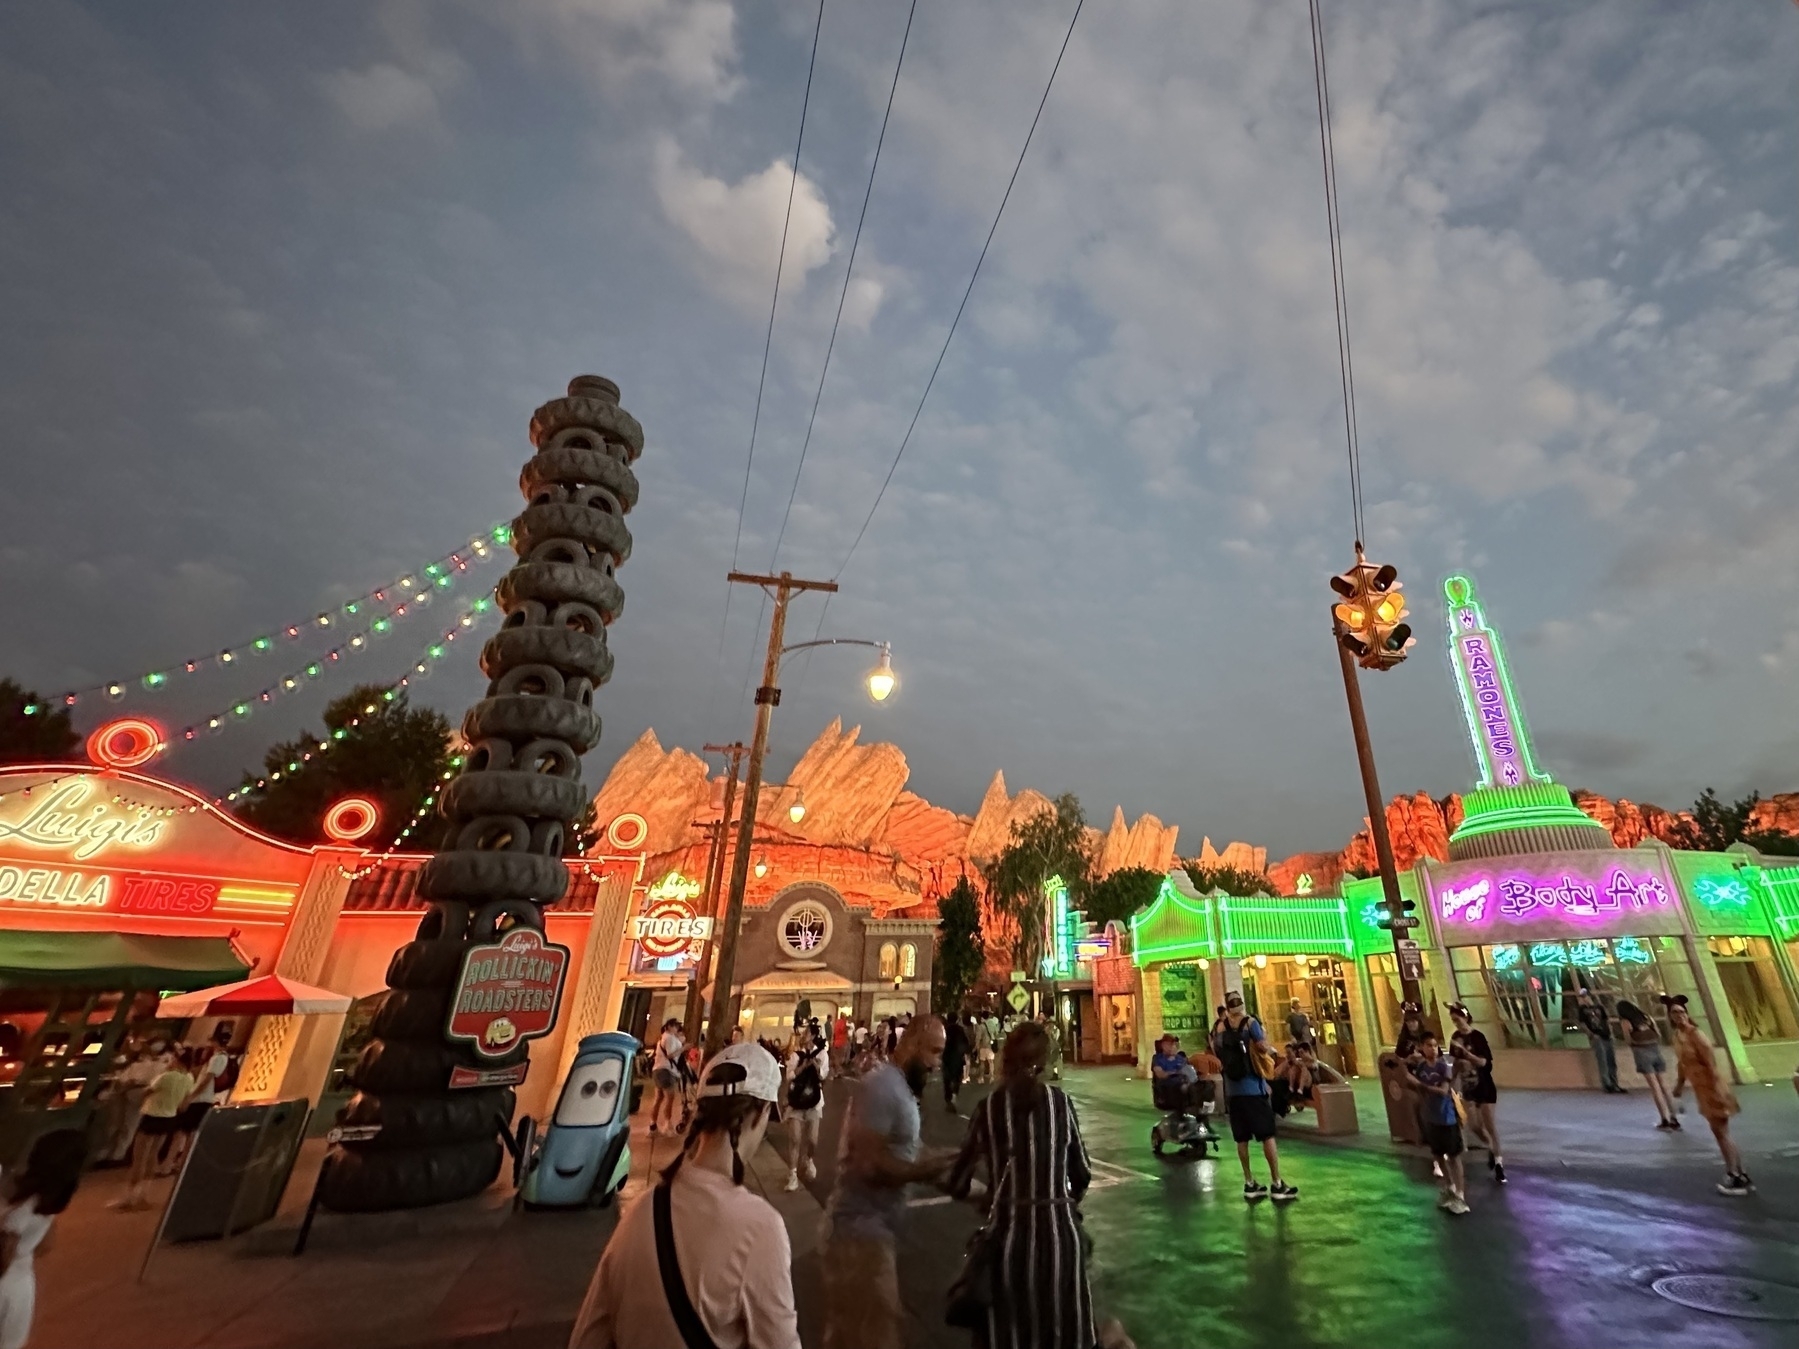 Radiator Springs lit up at night. Luigi’s Rollickin’ Roadsters on the left.